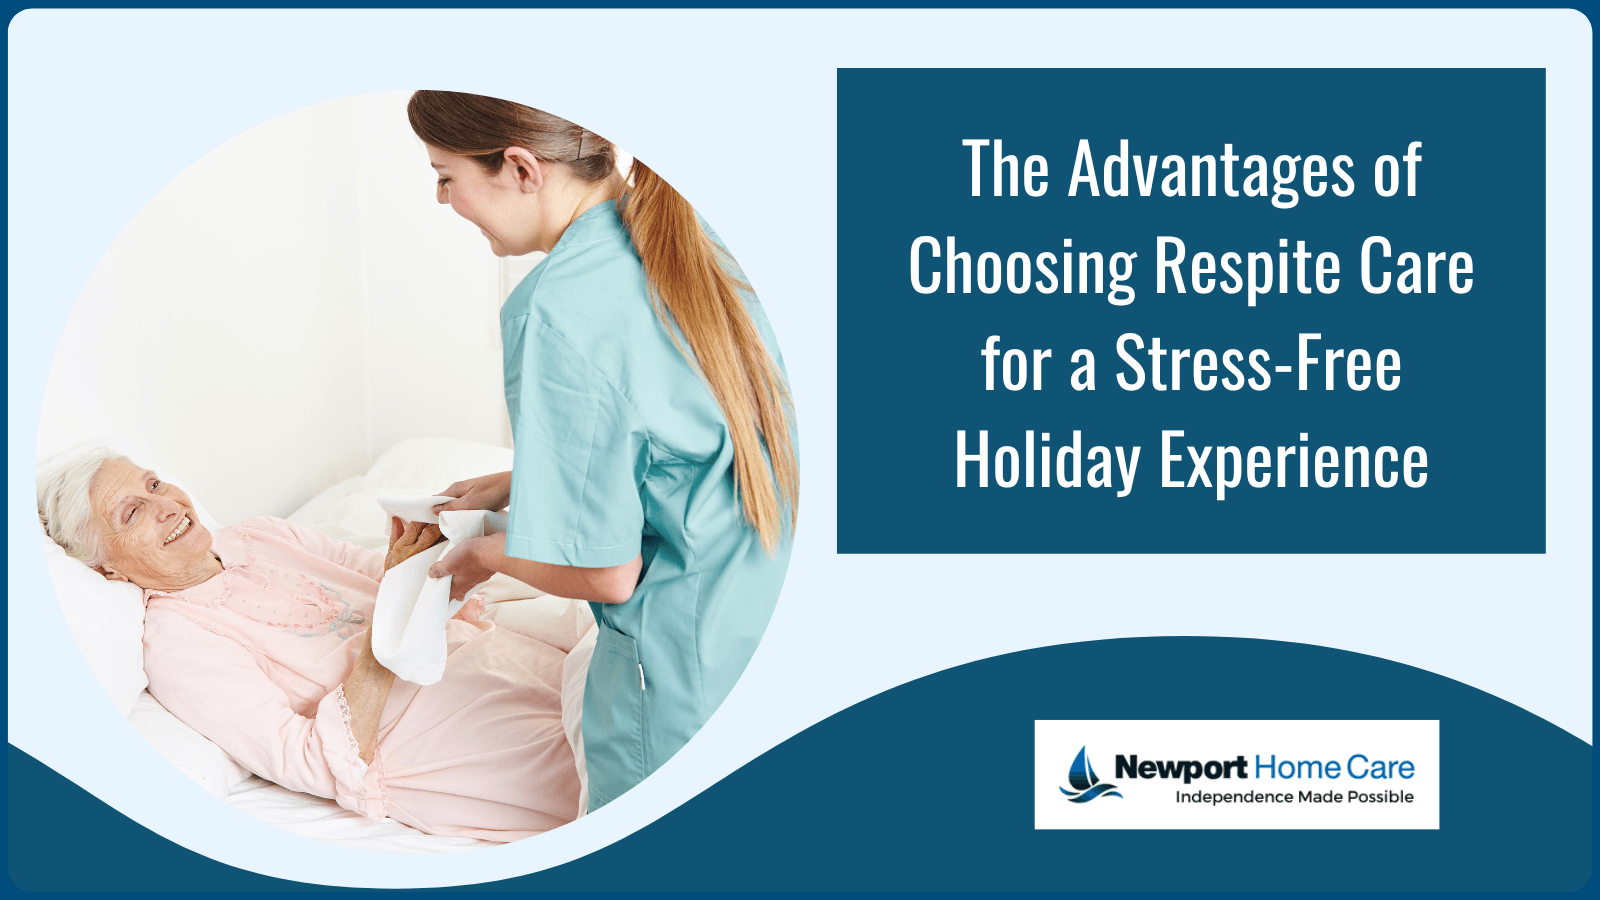 The Advantages of Choosing Respite Care for a Stress-Free Holiday Experience